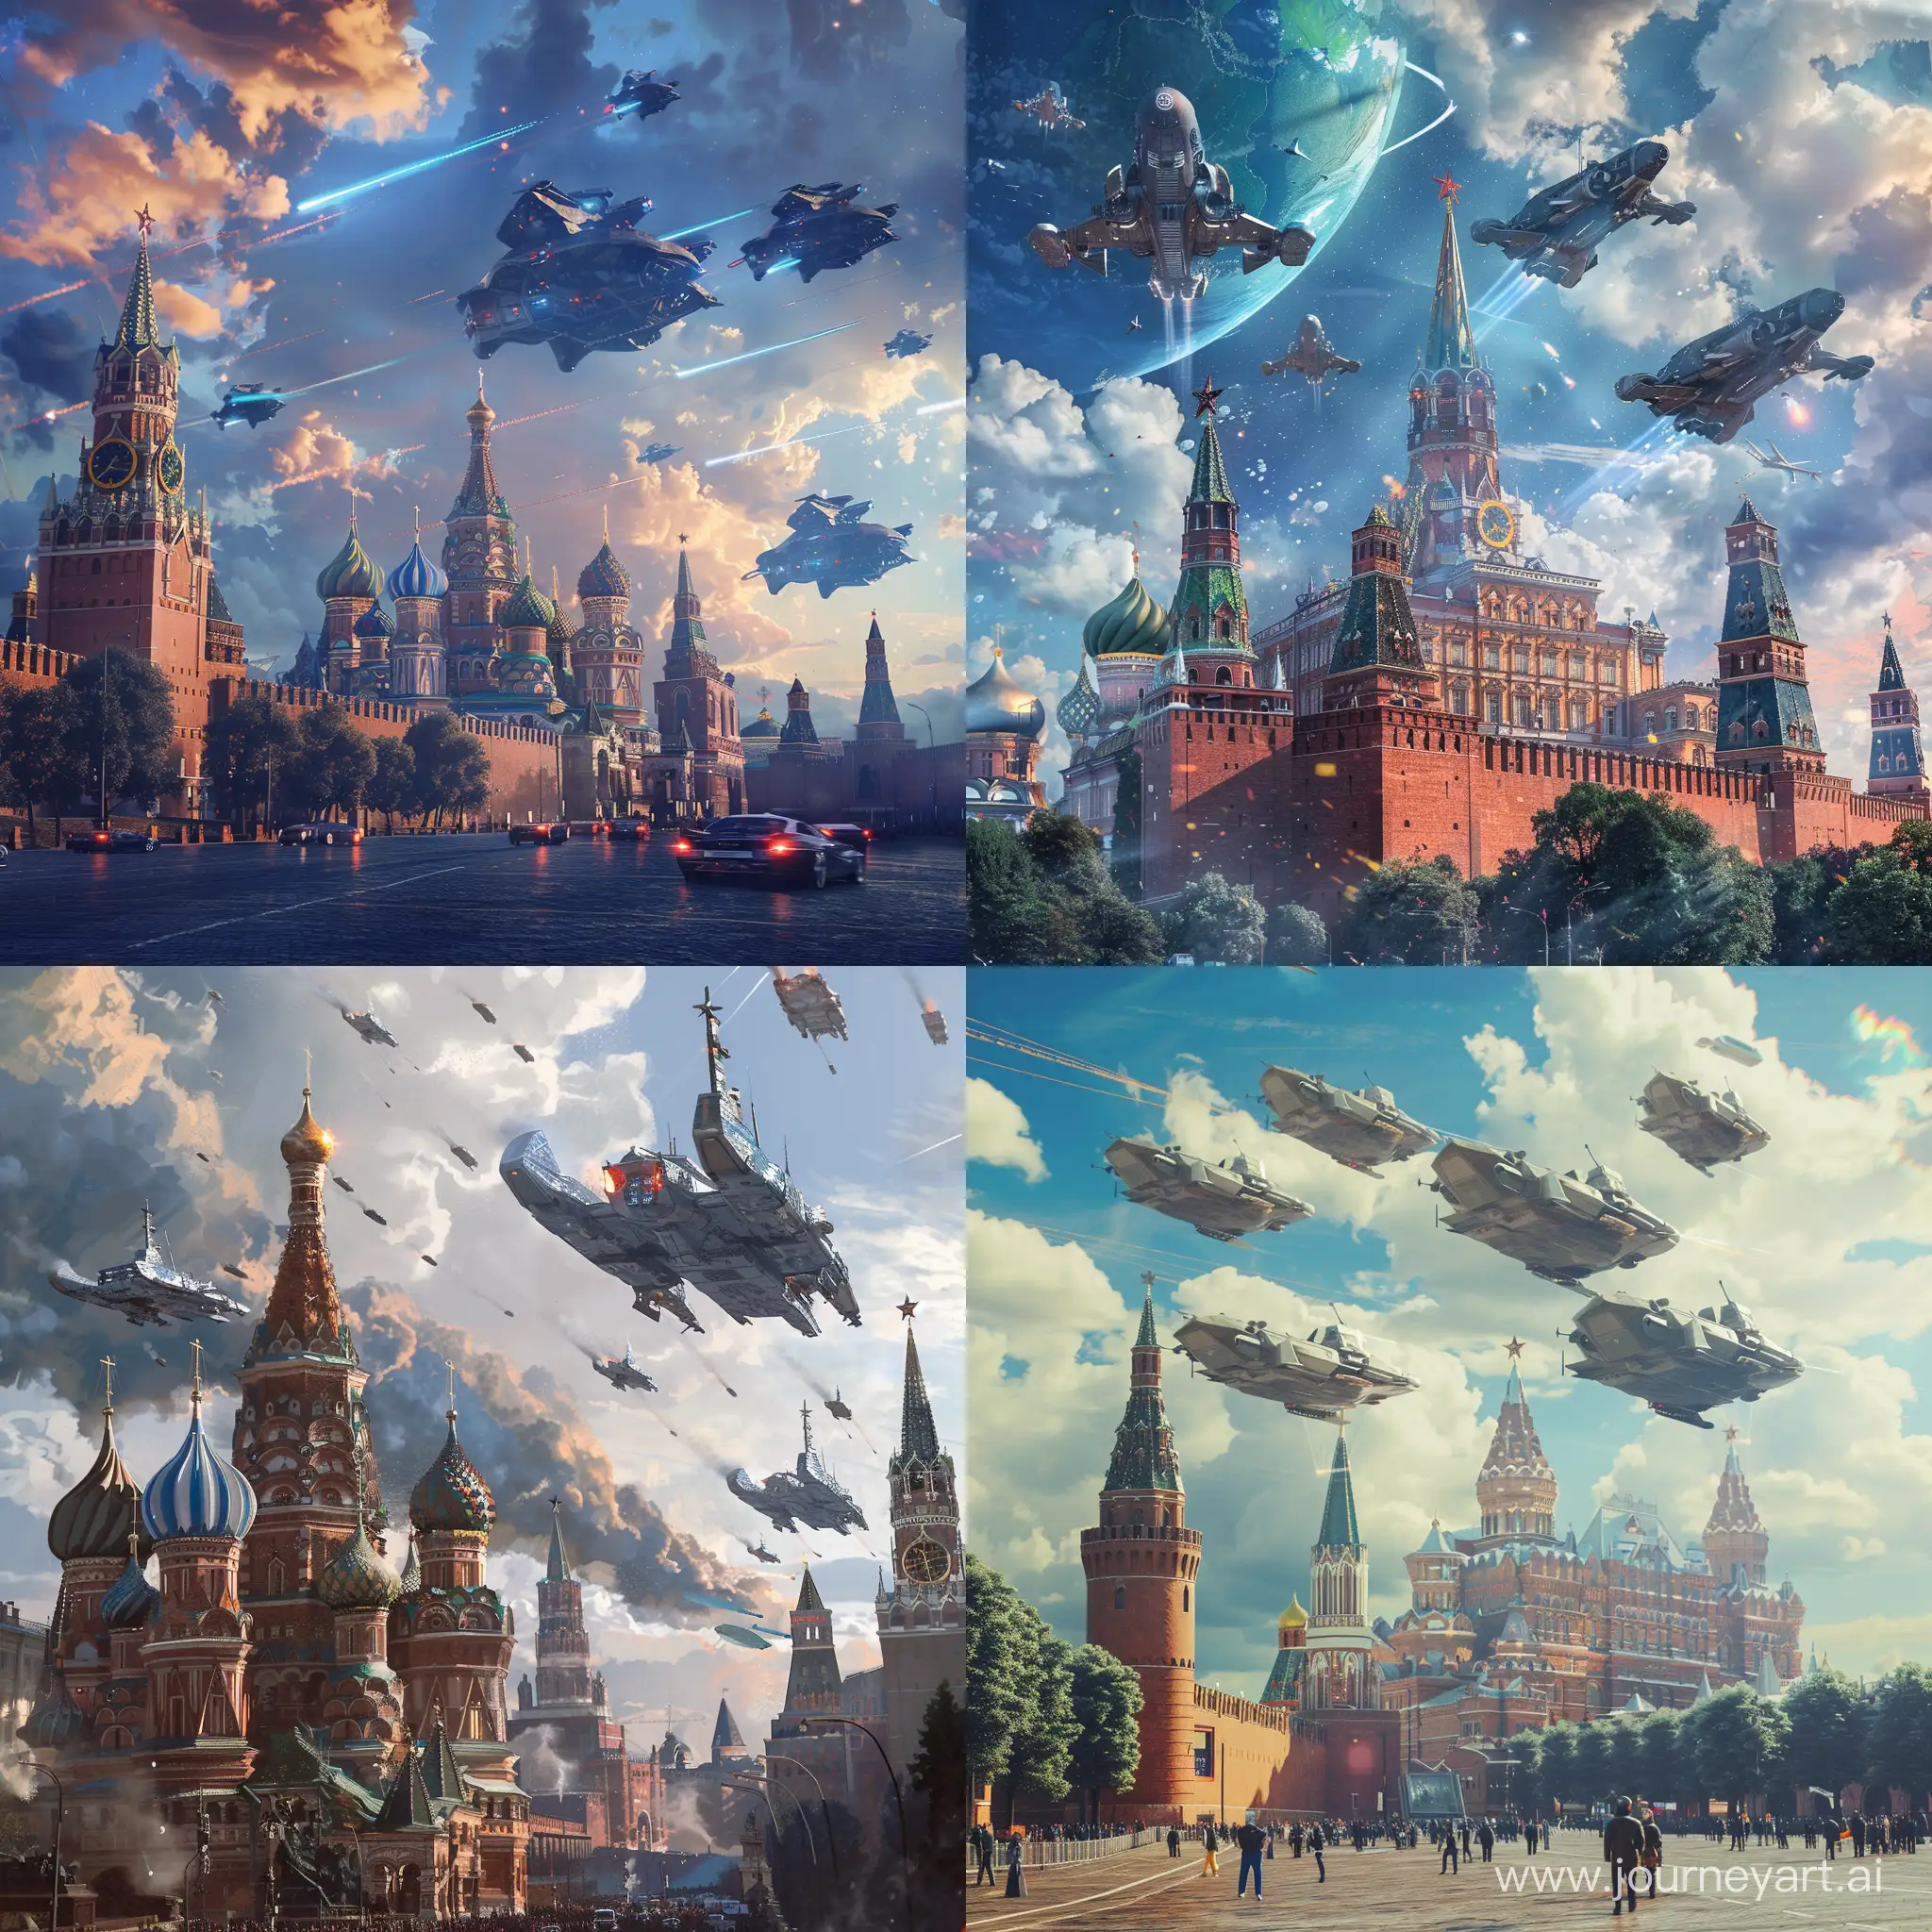 Futuristic-Red-Square-Spaceships-Soaring-Over-Moscow